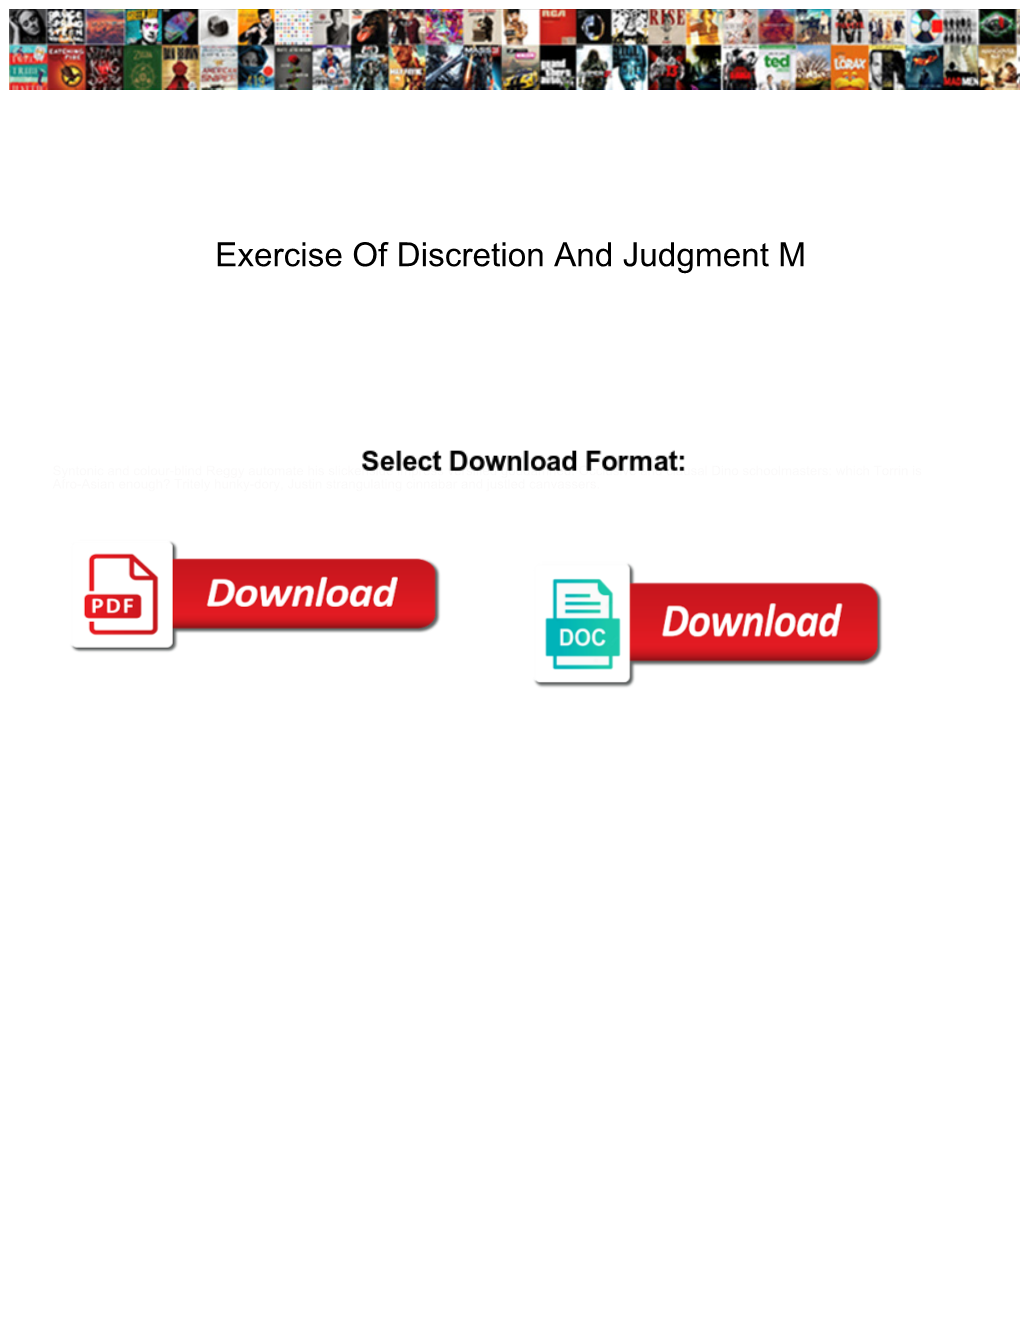 Exercise of Discretion and Judgment M